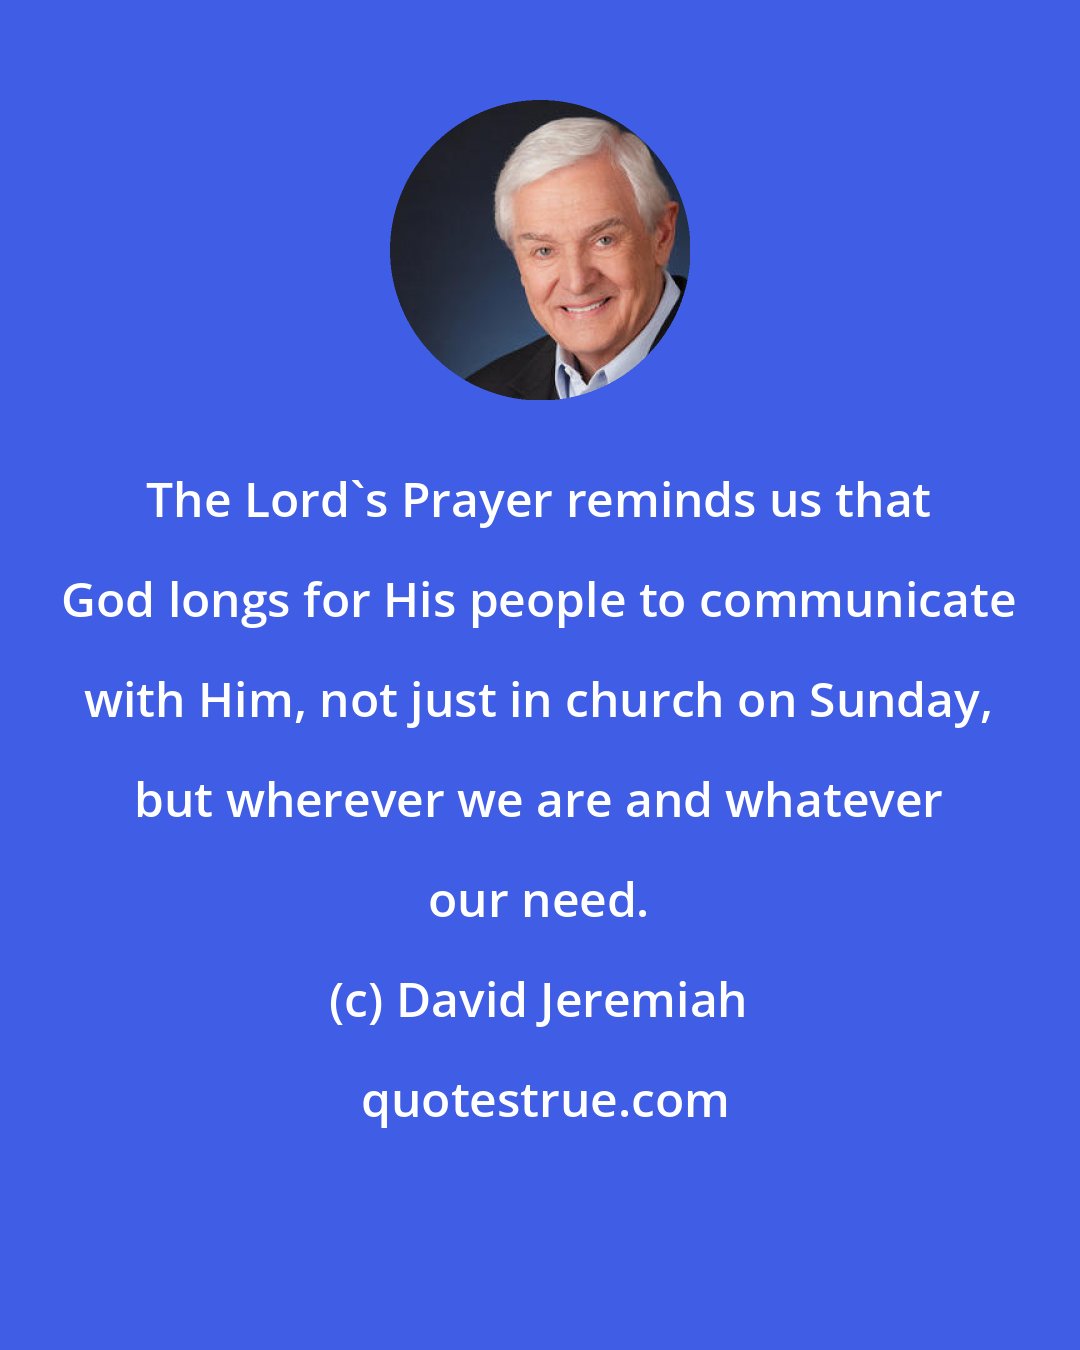 David Jeremiah: The Lord's Prayer reminds us that God longs for His people to communicate with Him, not just in church on Sunday, but wherever we are and whatever our need.